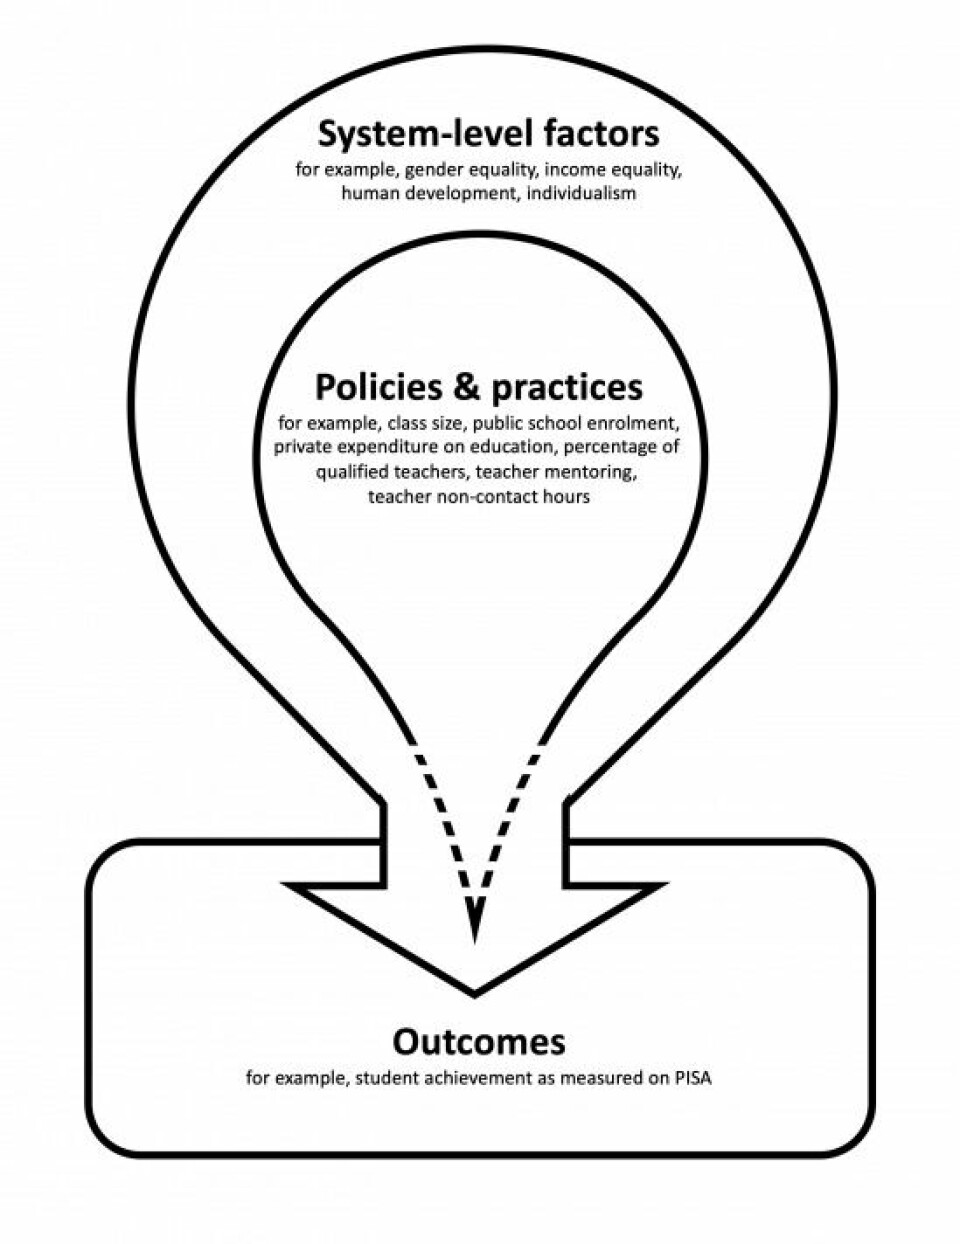 How Campbell graphically summarises the affect of system-level factors on education policy, practices, and outcomes.